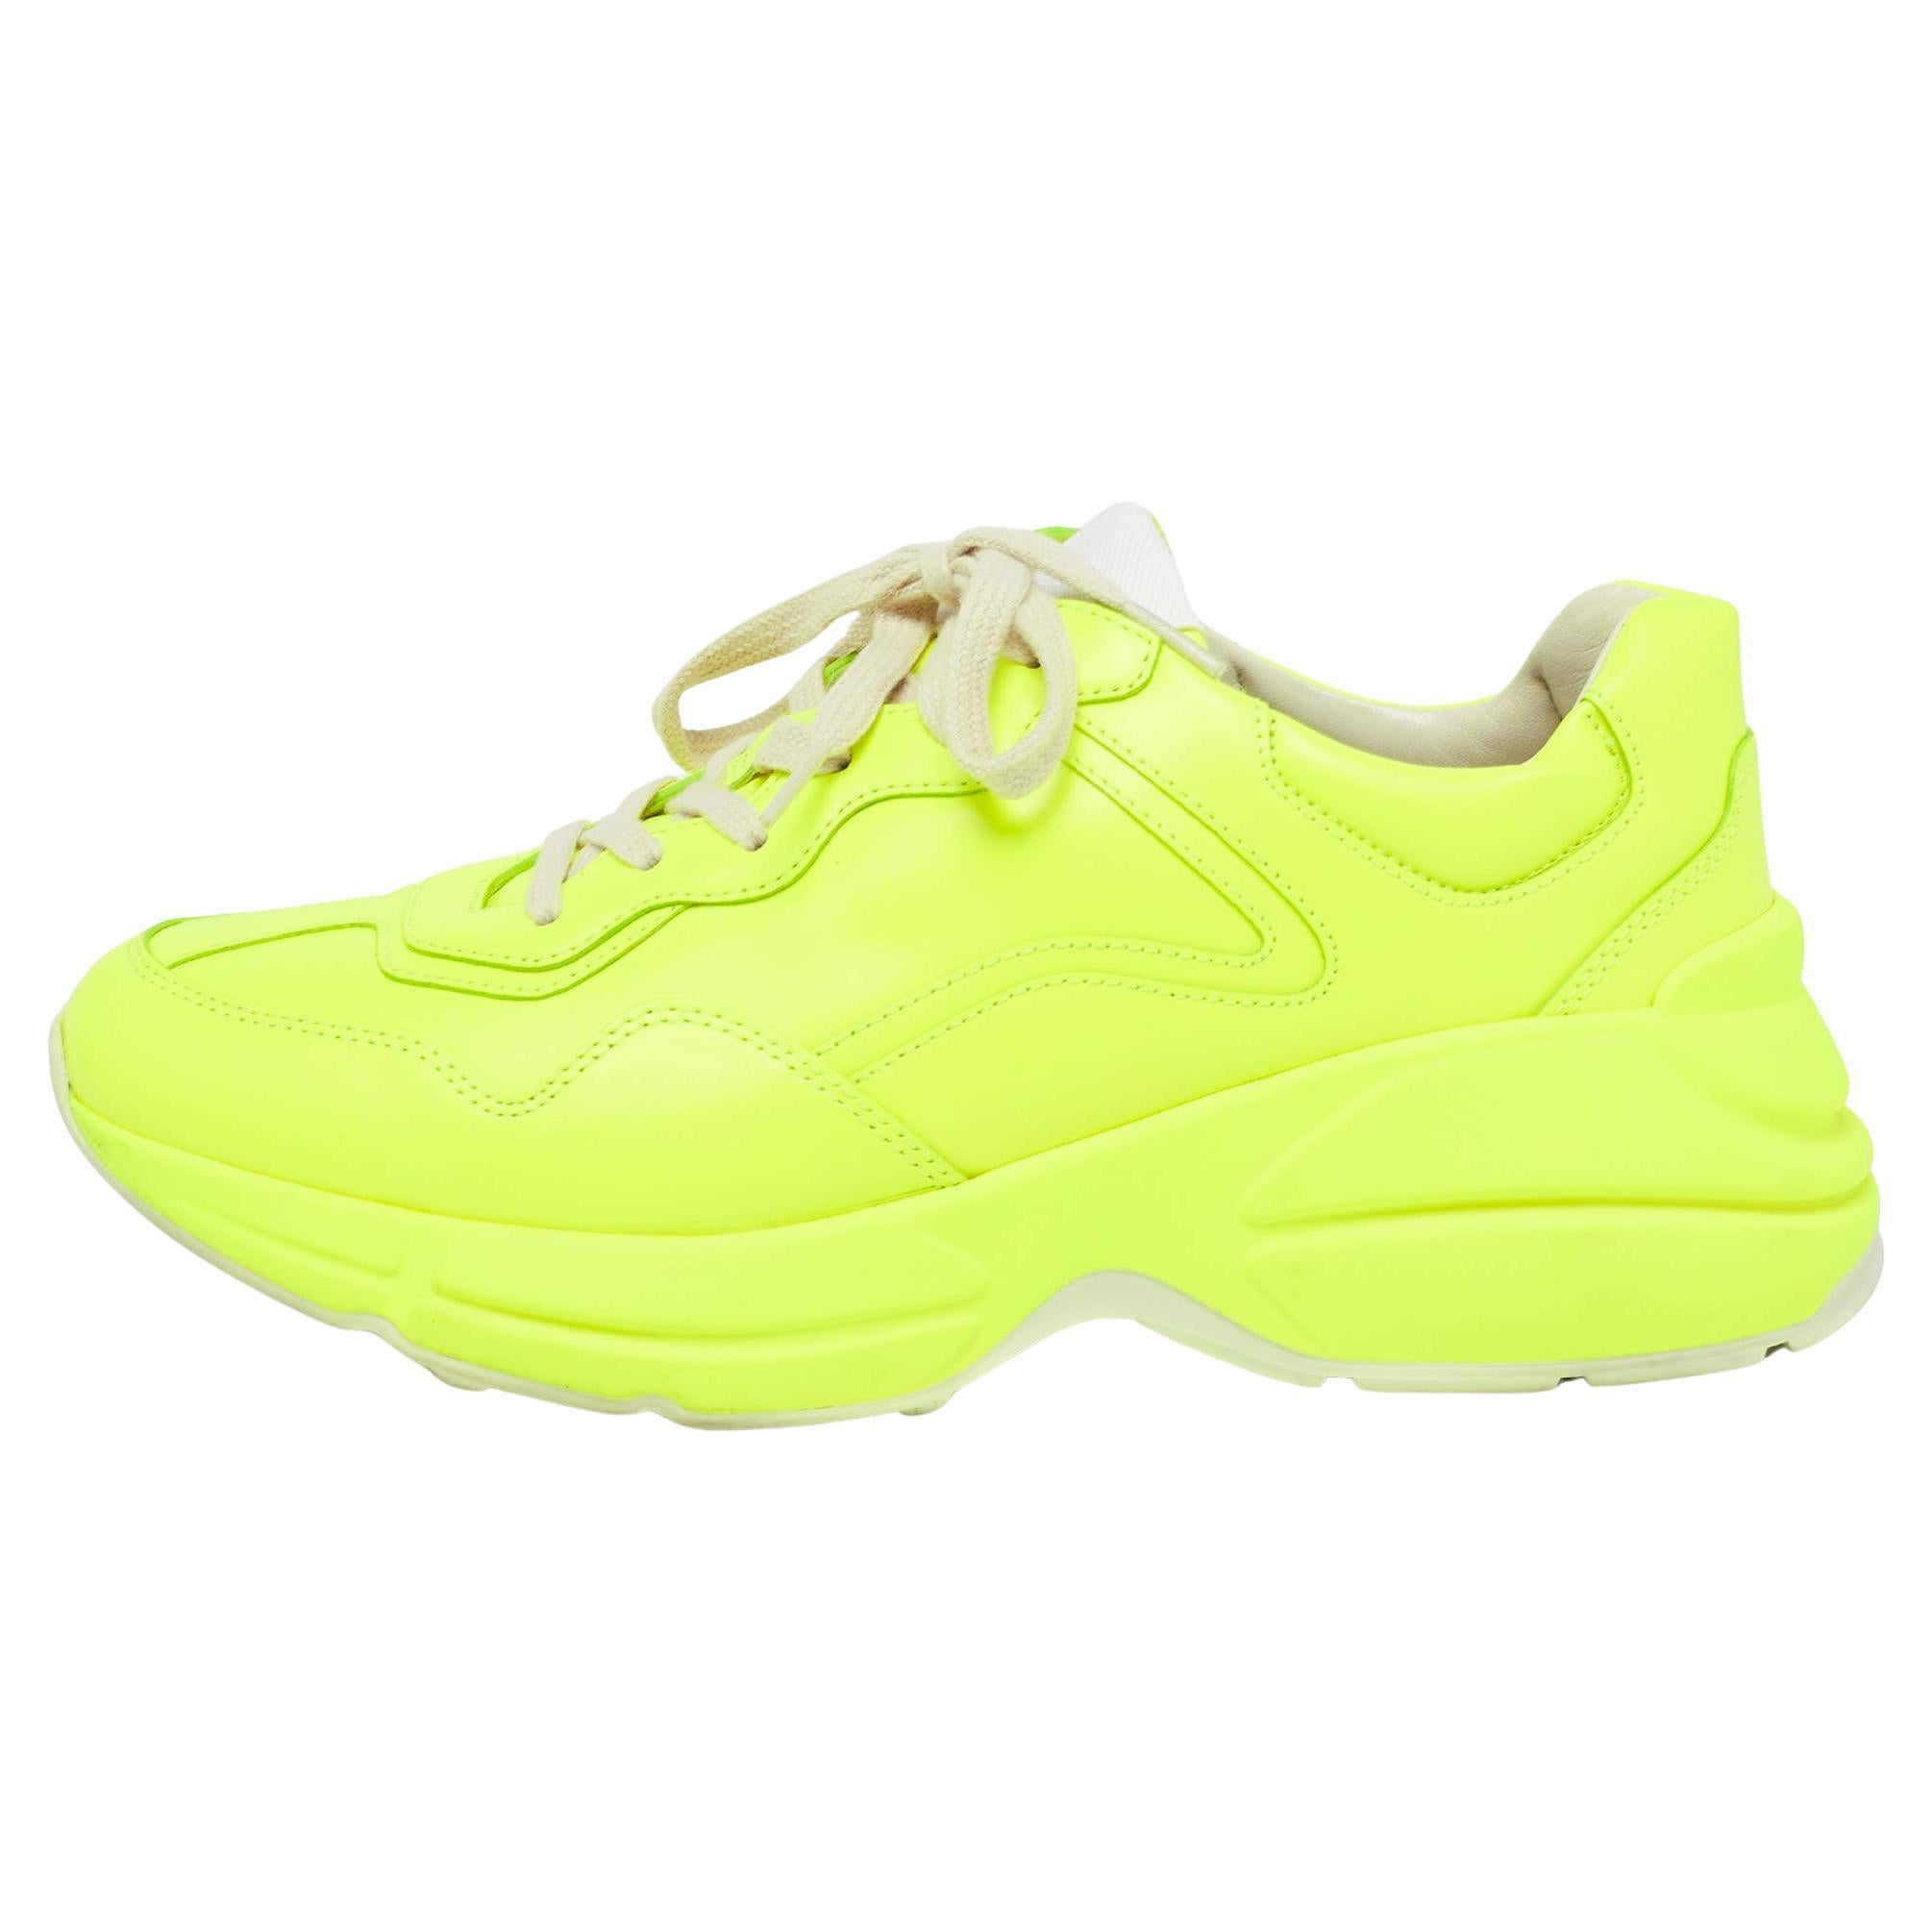 Gucci Neon Yellow Leather Rhyton Sneakers Size 39 For Sale